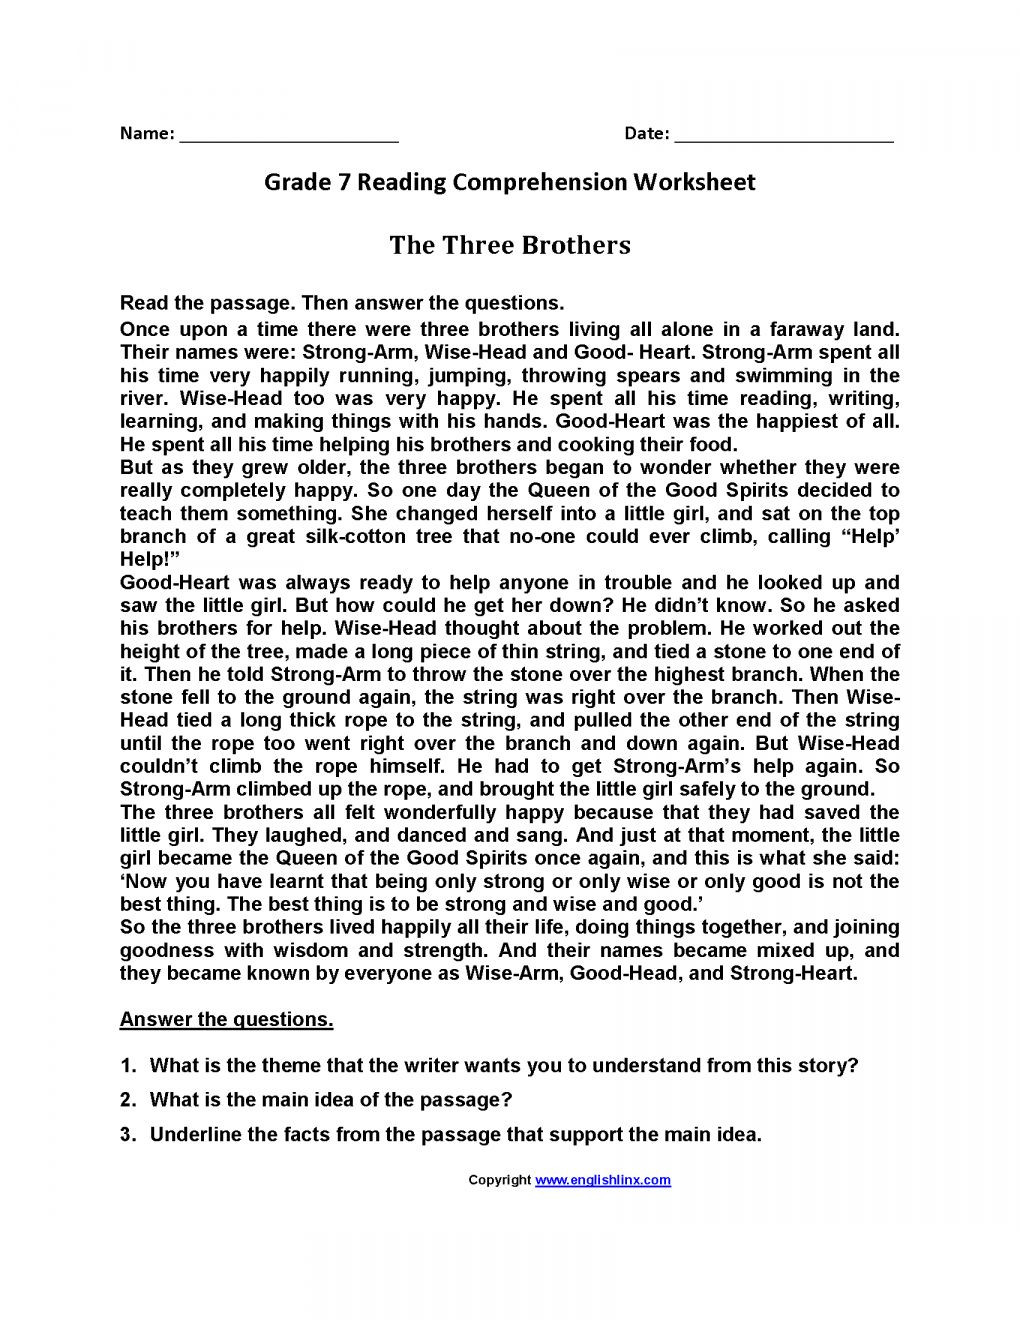 Seventh Grade Reading Comprehension Worksheets English Texts Image by Rosangela Teixeira In 2020